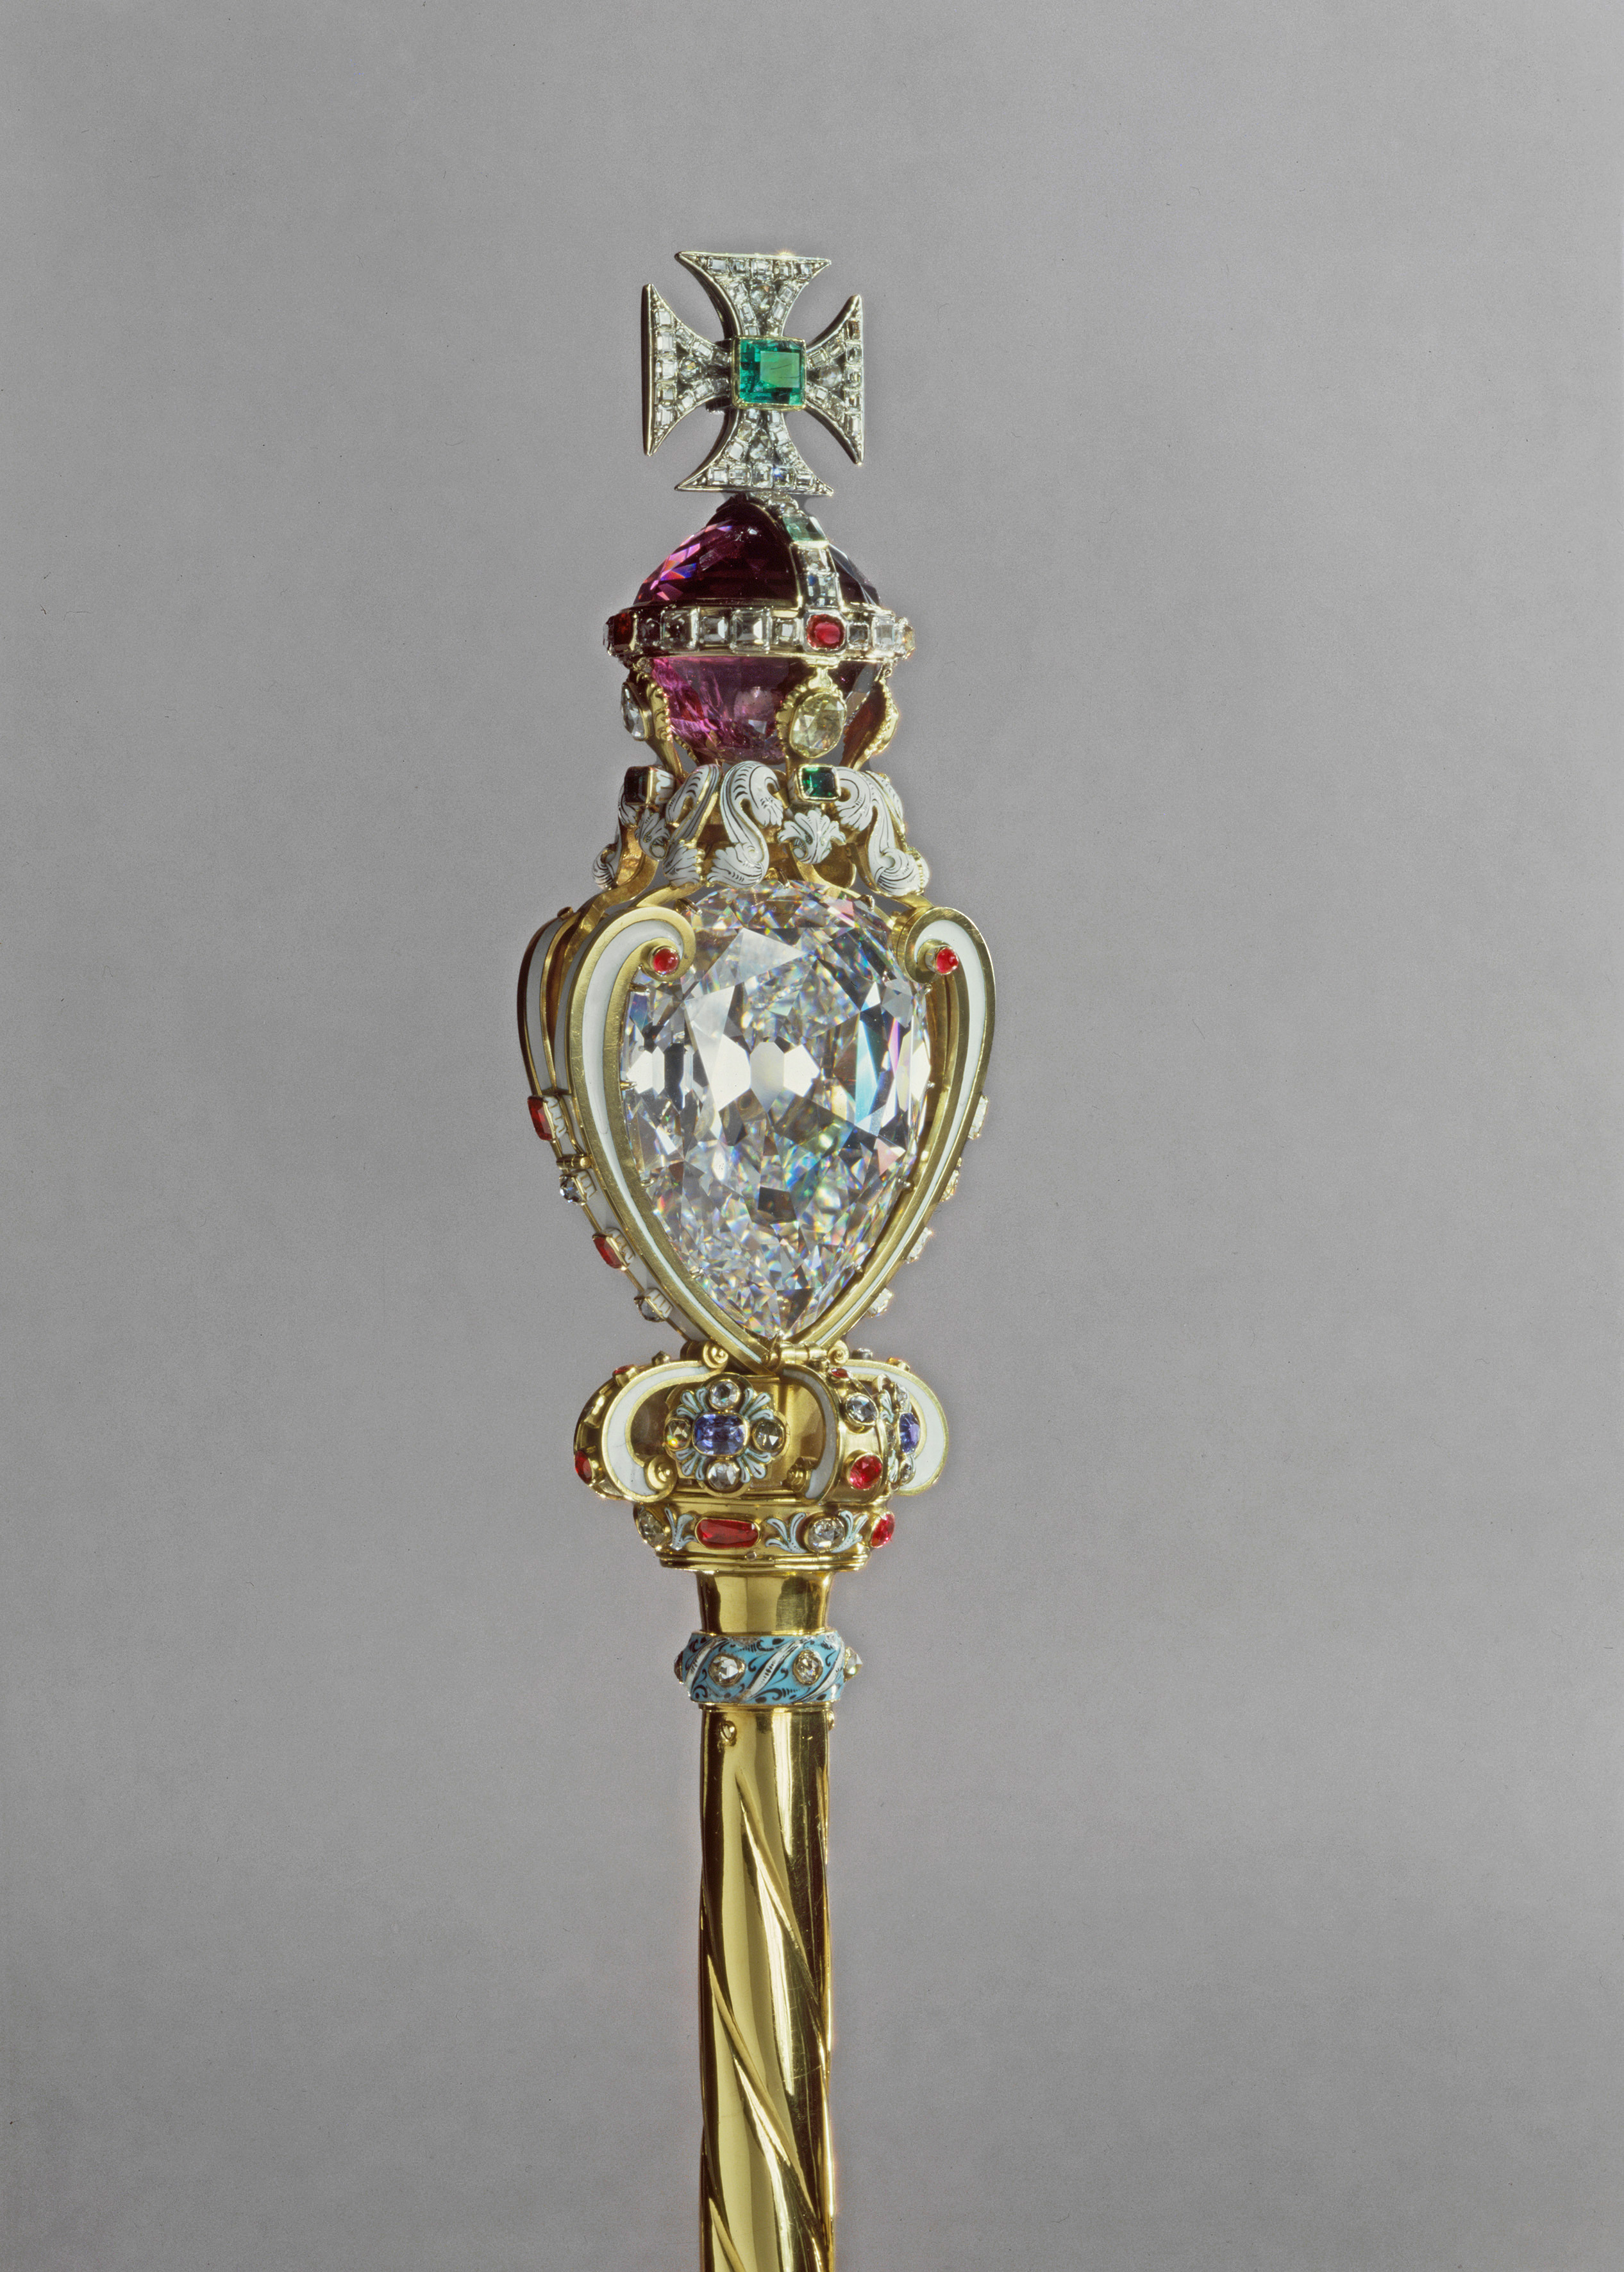 The Cullinan I diamond on the top of the Sovereign's Sceptre with Cross